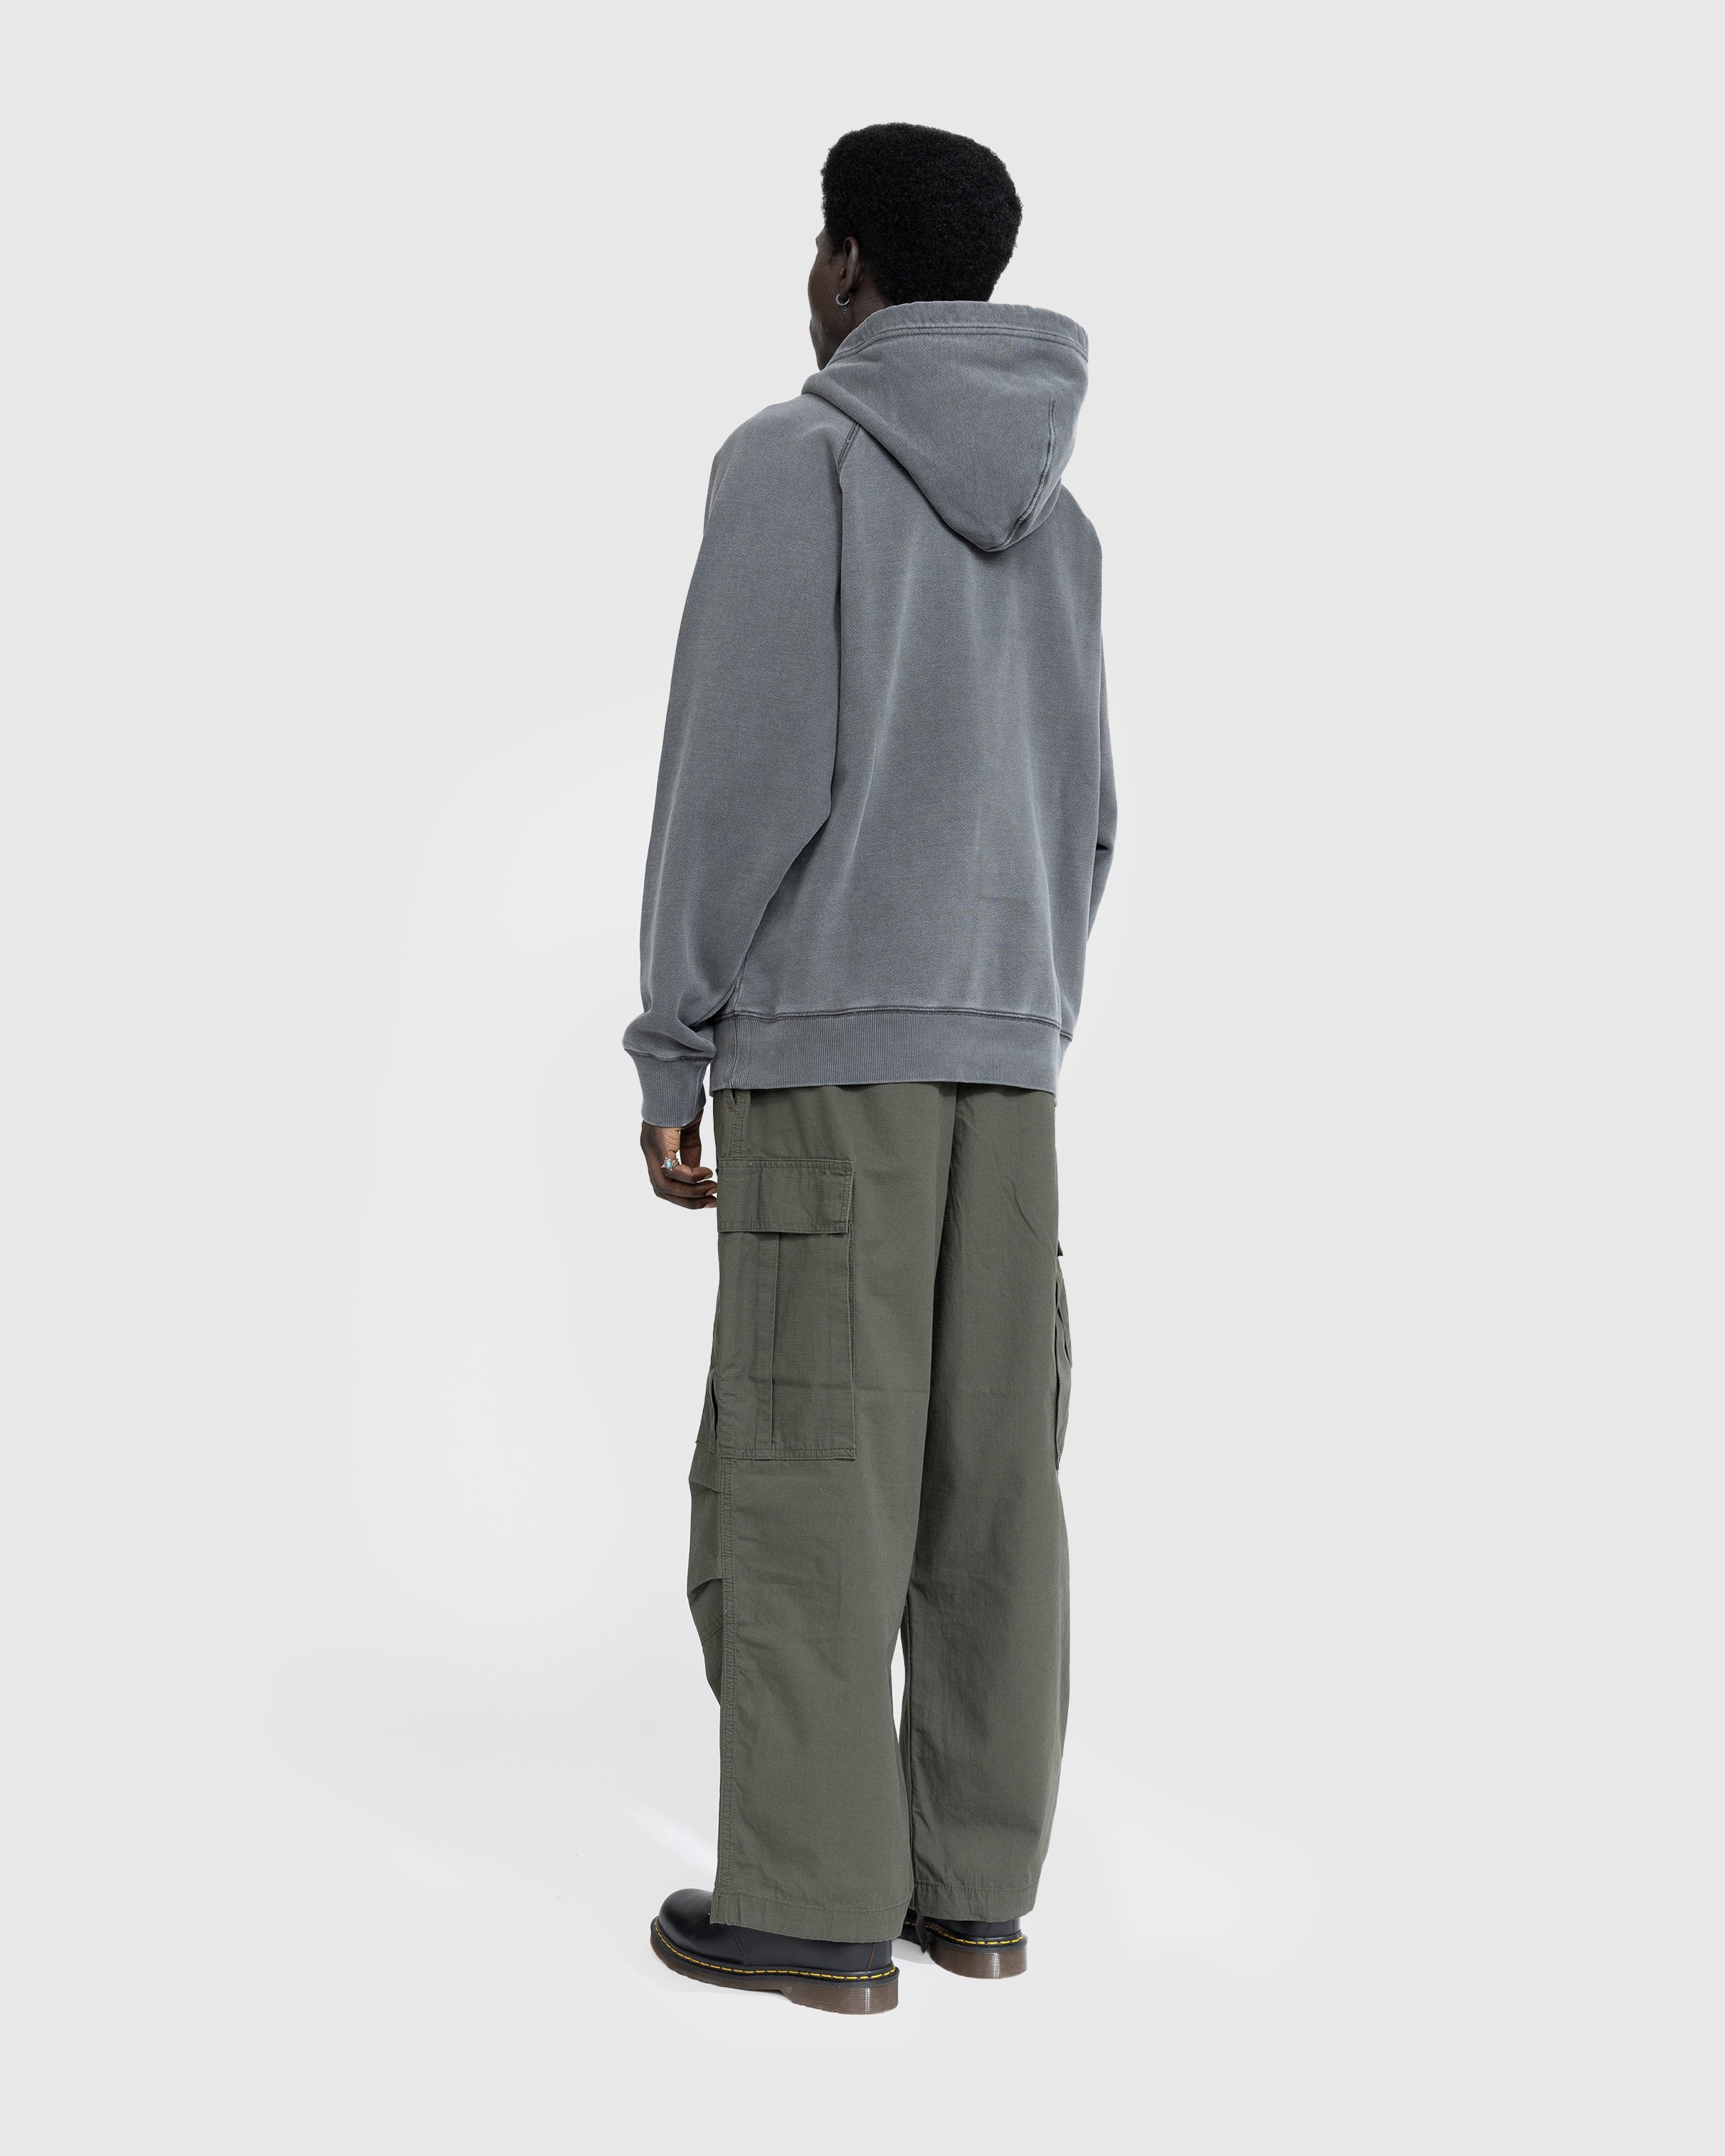 Carhartt WIP - Jet Cargo Pant Cypress/Rinsed - Clothing - Green - Image 3